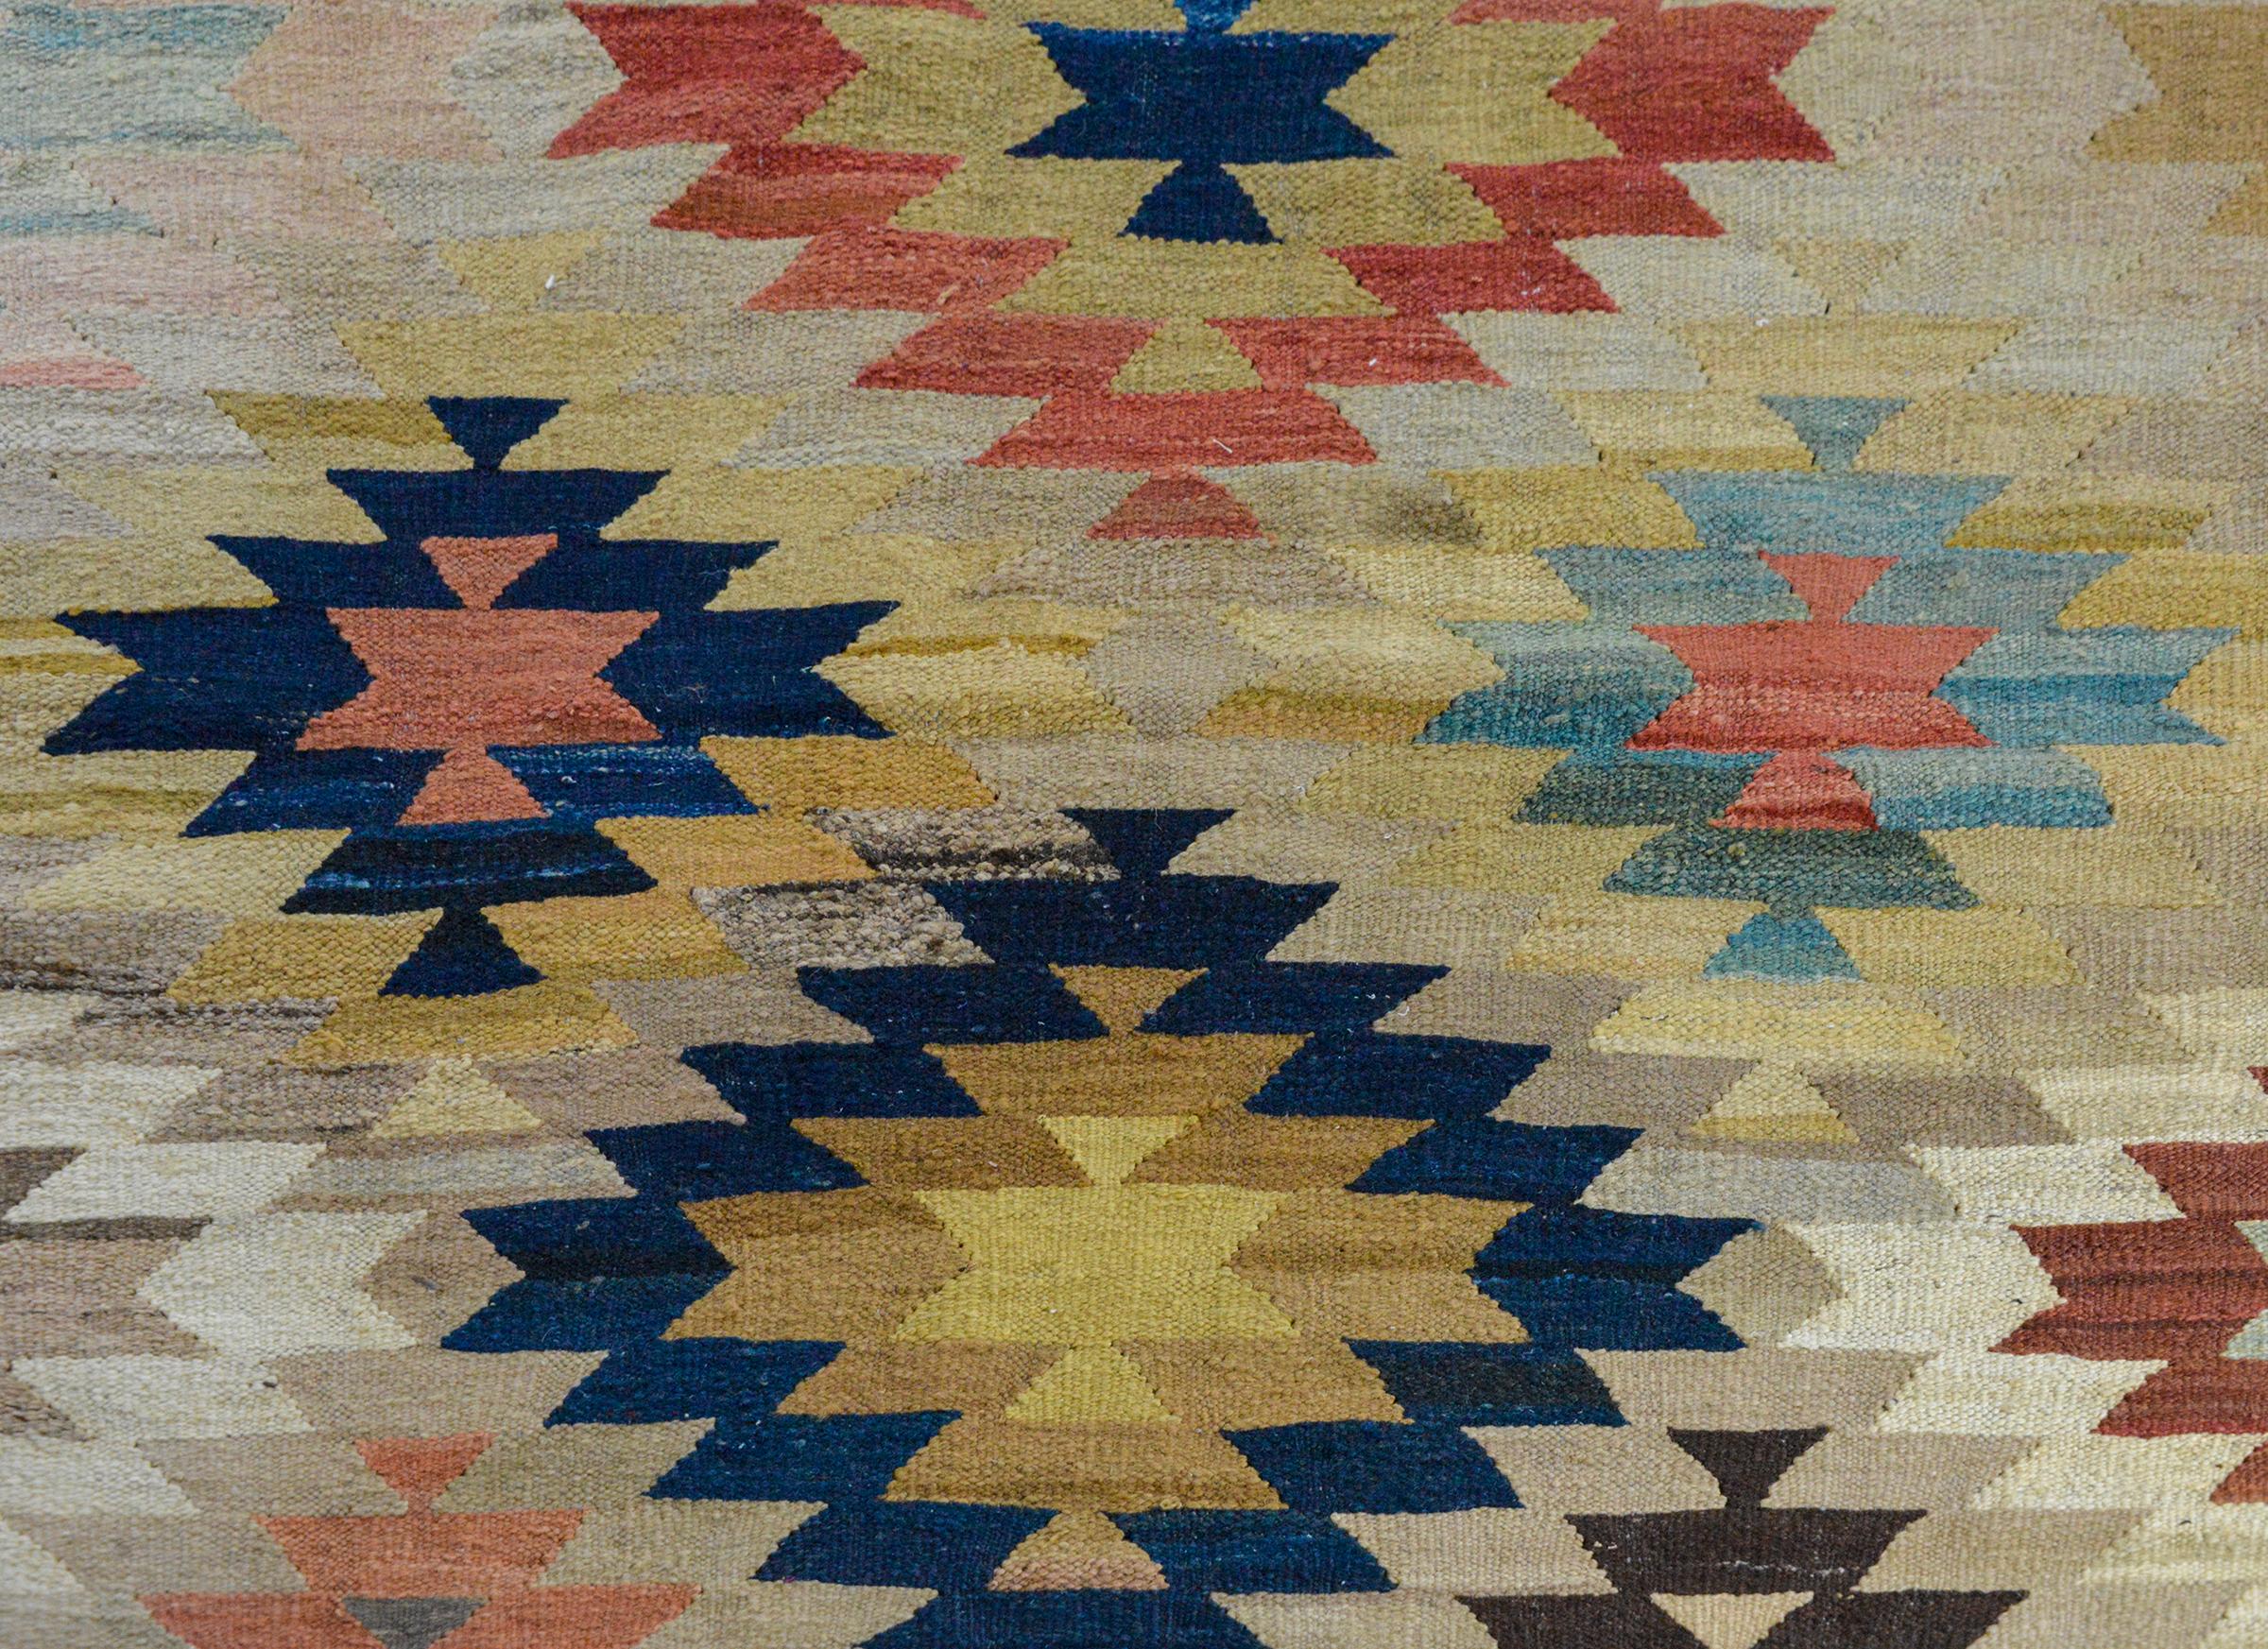 Late 20th Century Afghani Kilim Rug In Good Condition For Sale In Chicago, IL